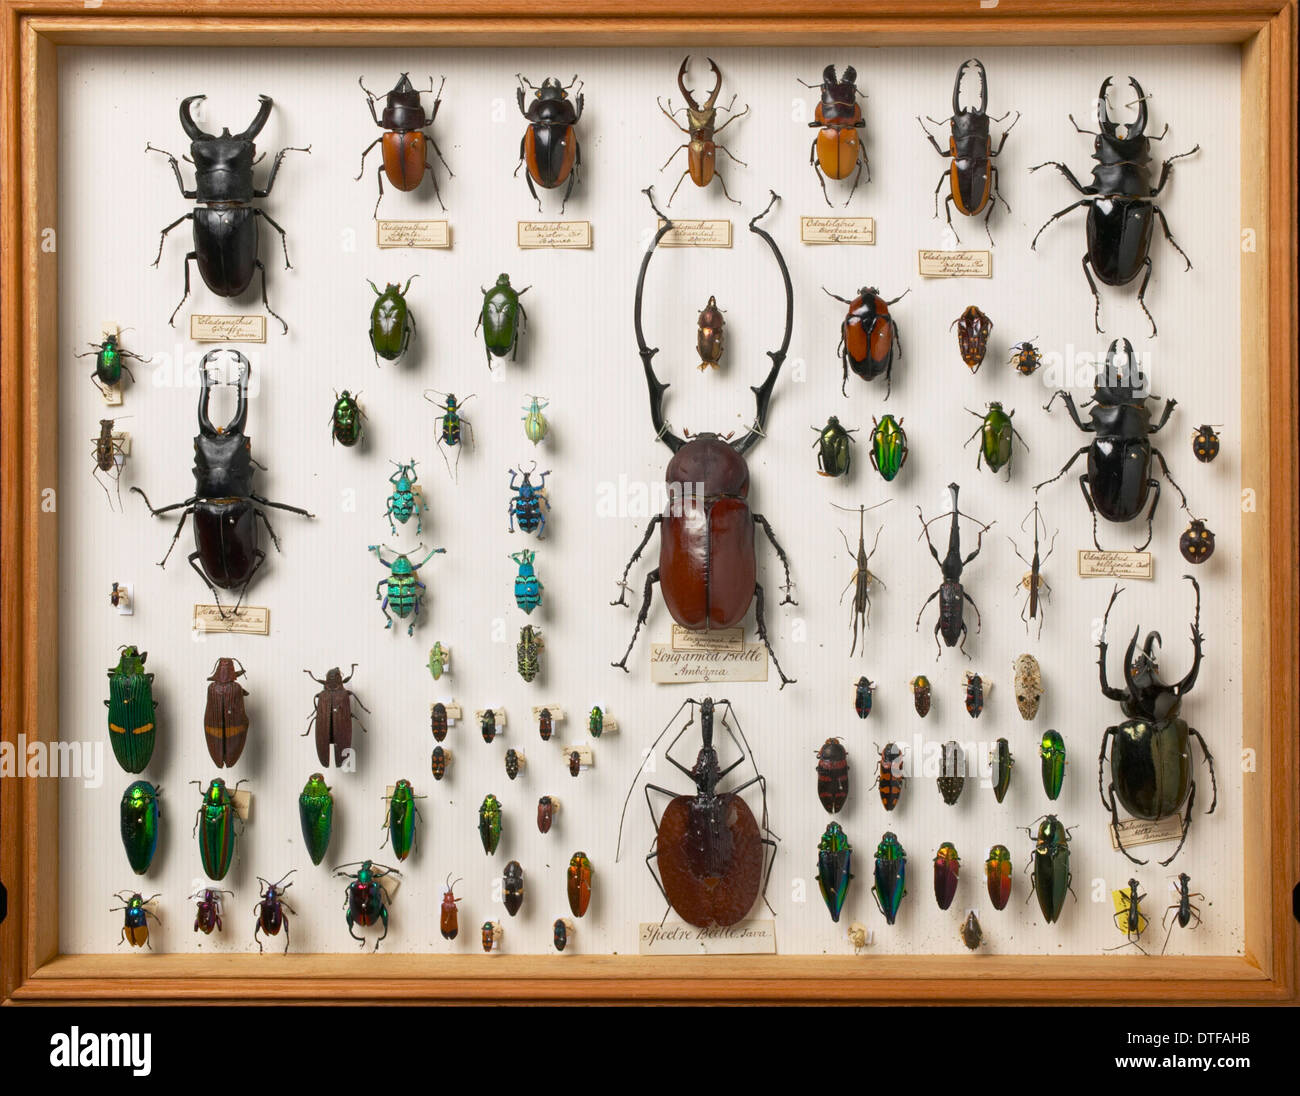 Specimens of Asian beetles from the Wallace Collection Stock Photo